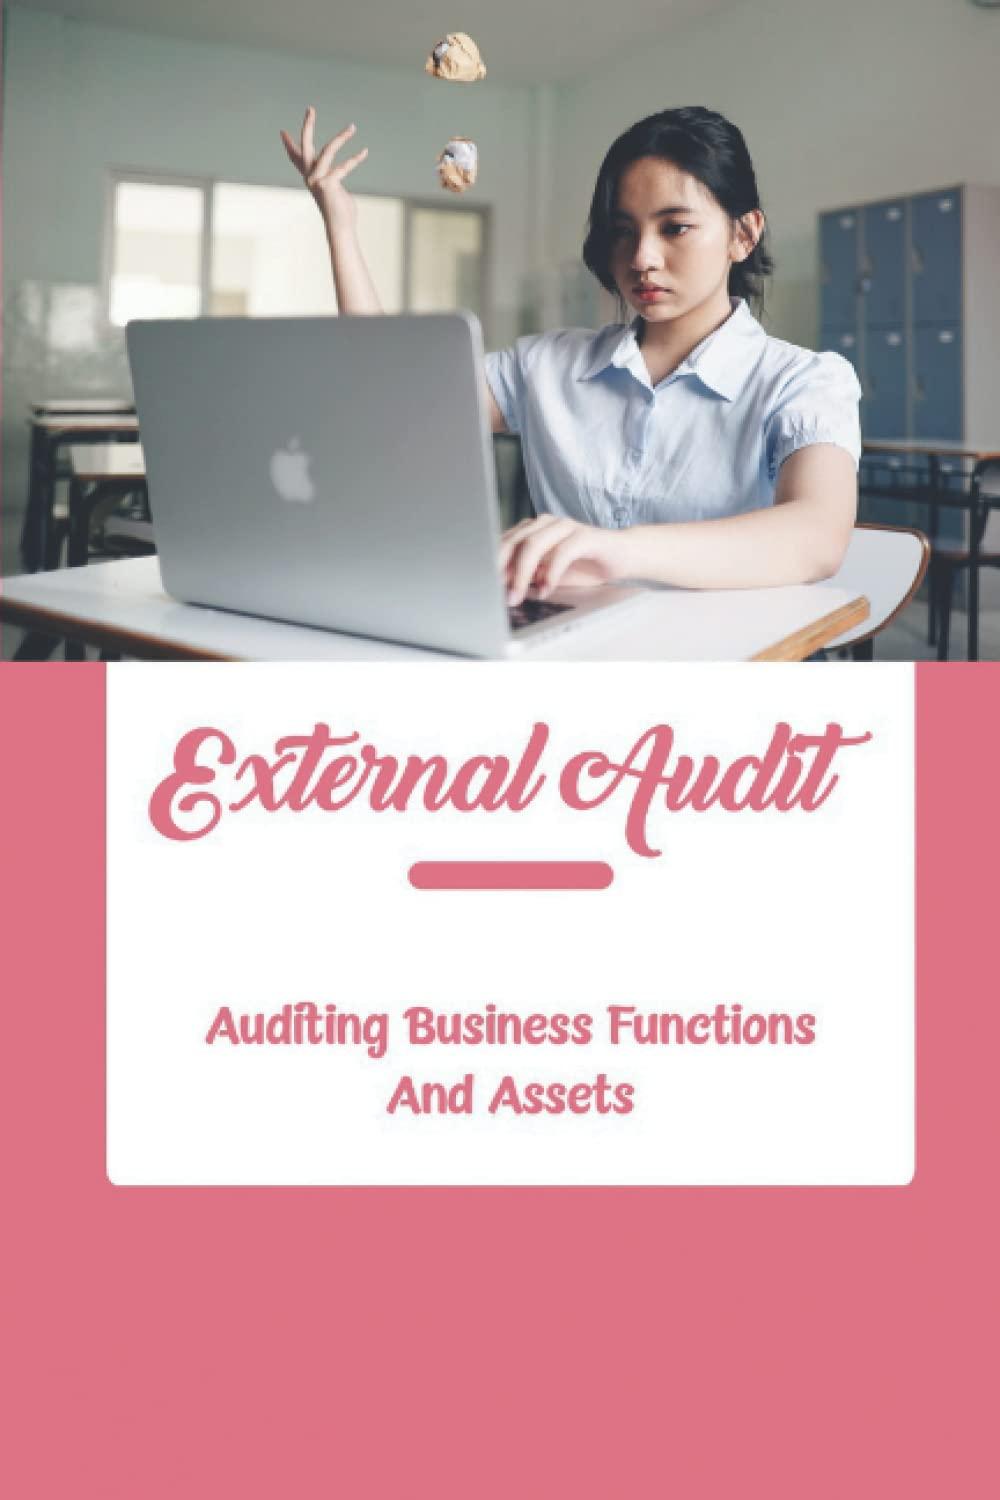 external audit auditing business functions and assets 1st edition bart rohman b0b5nr6tb6, 979-8839201767